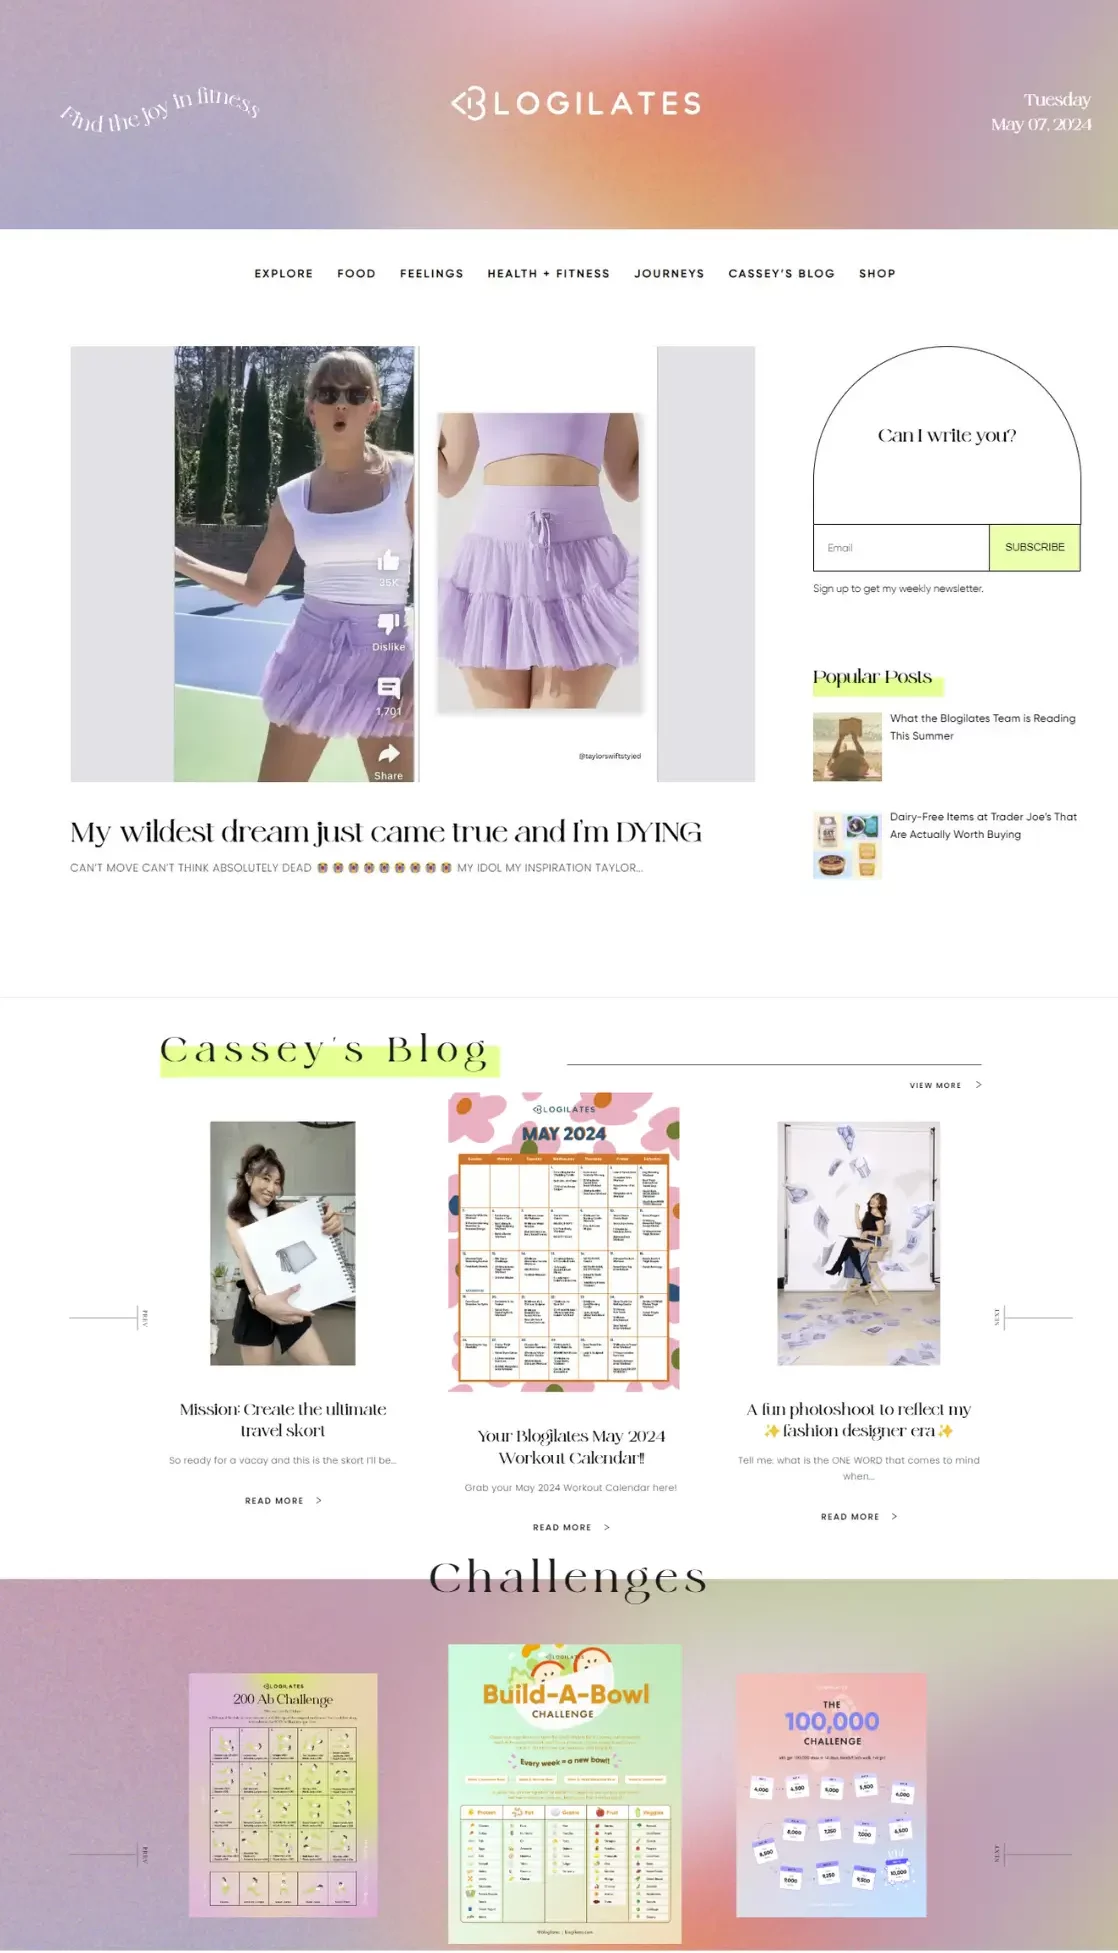 A screenshot of the Blogilates blog page that includes the latest posts, Cassey's blog, and Pilates challenge downloads.